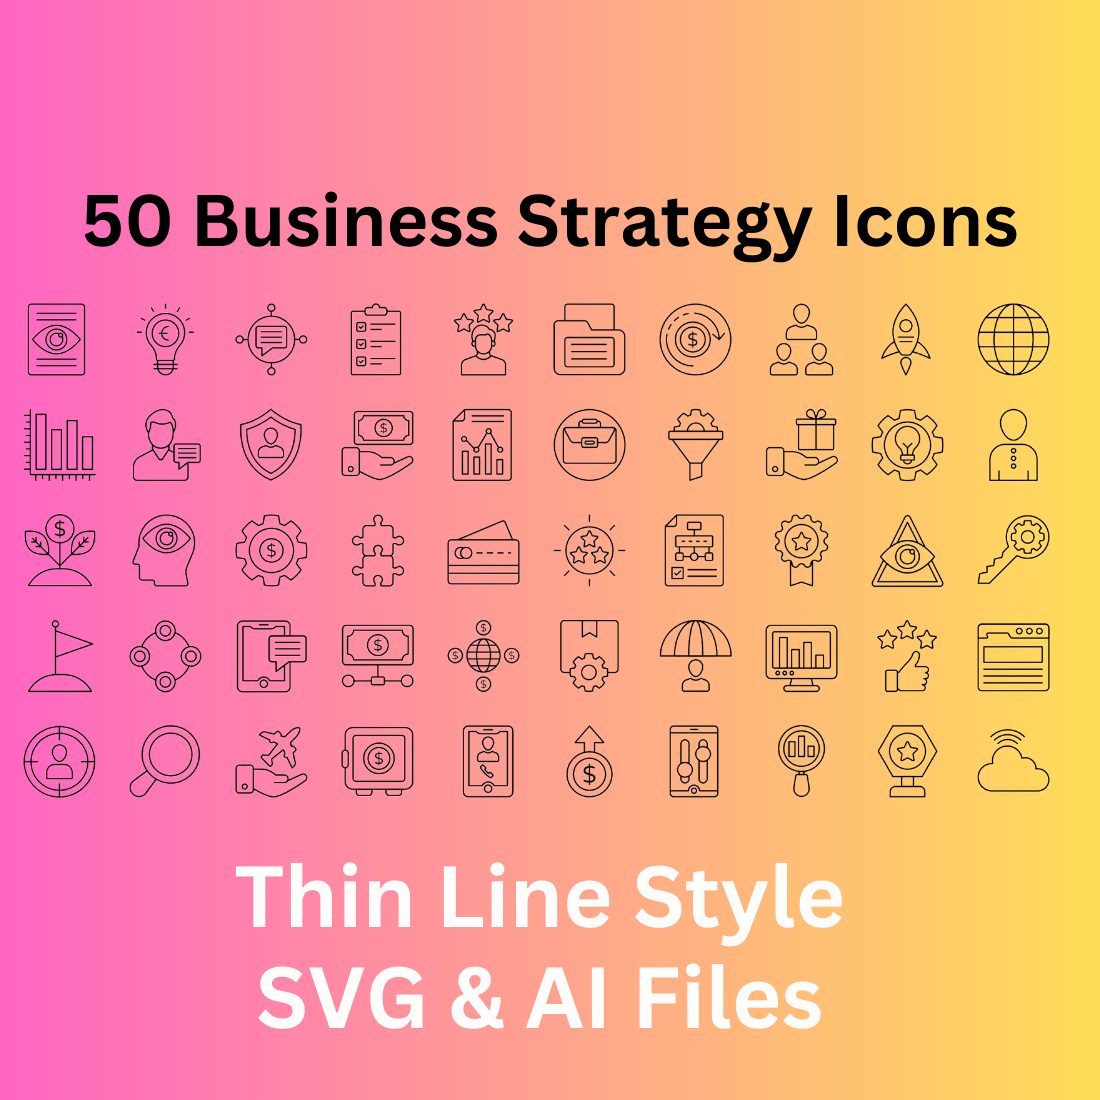 Business Strategy Icon Set 50 Outline Icons - SVG And AI Files cover image.